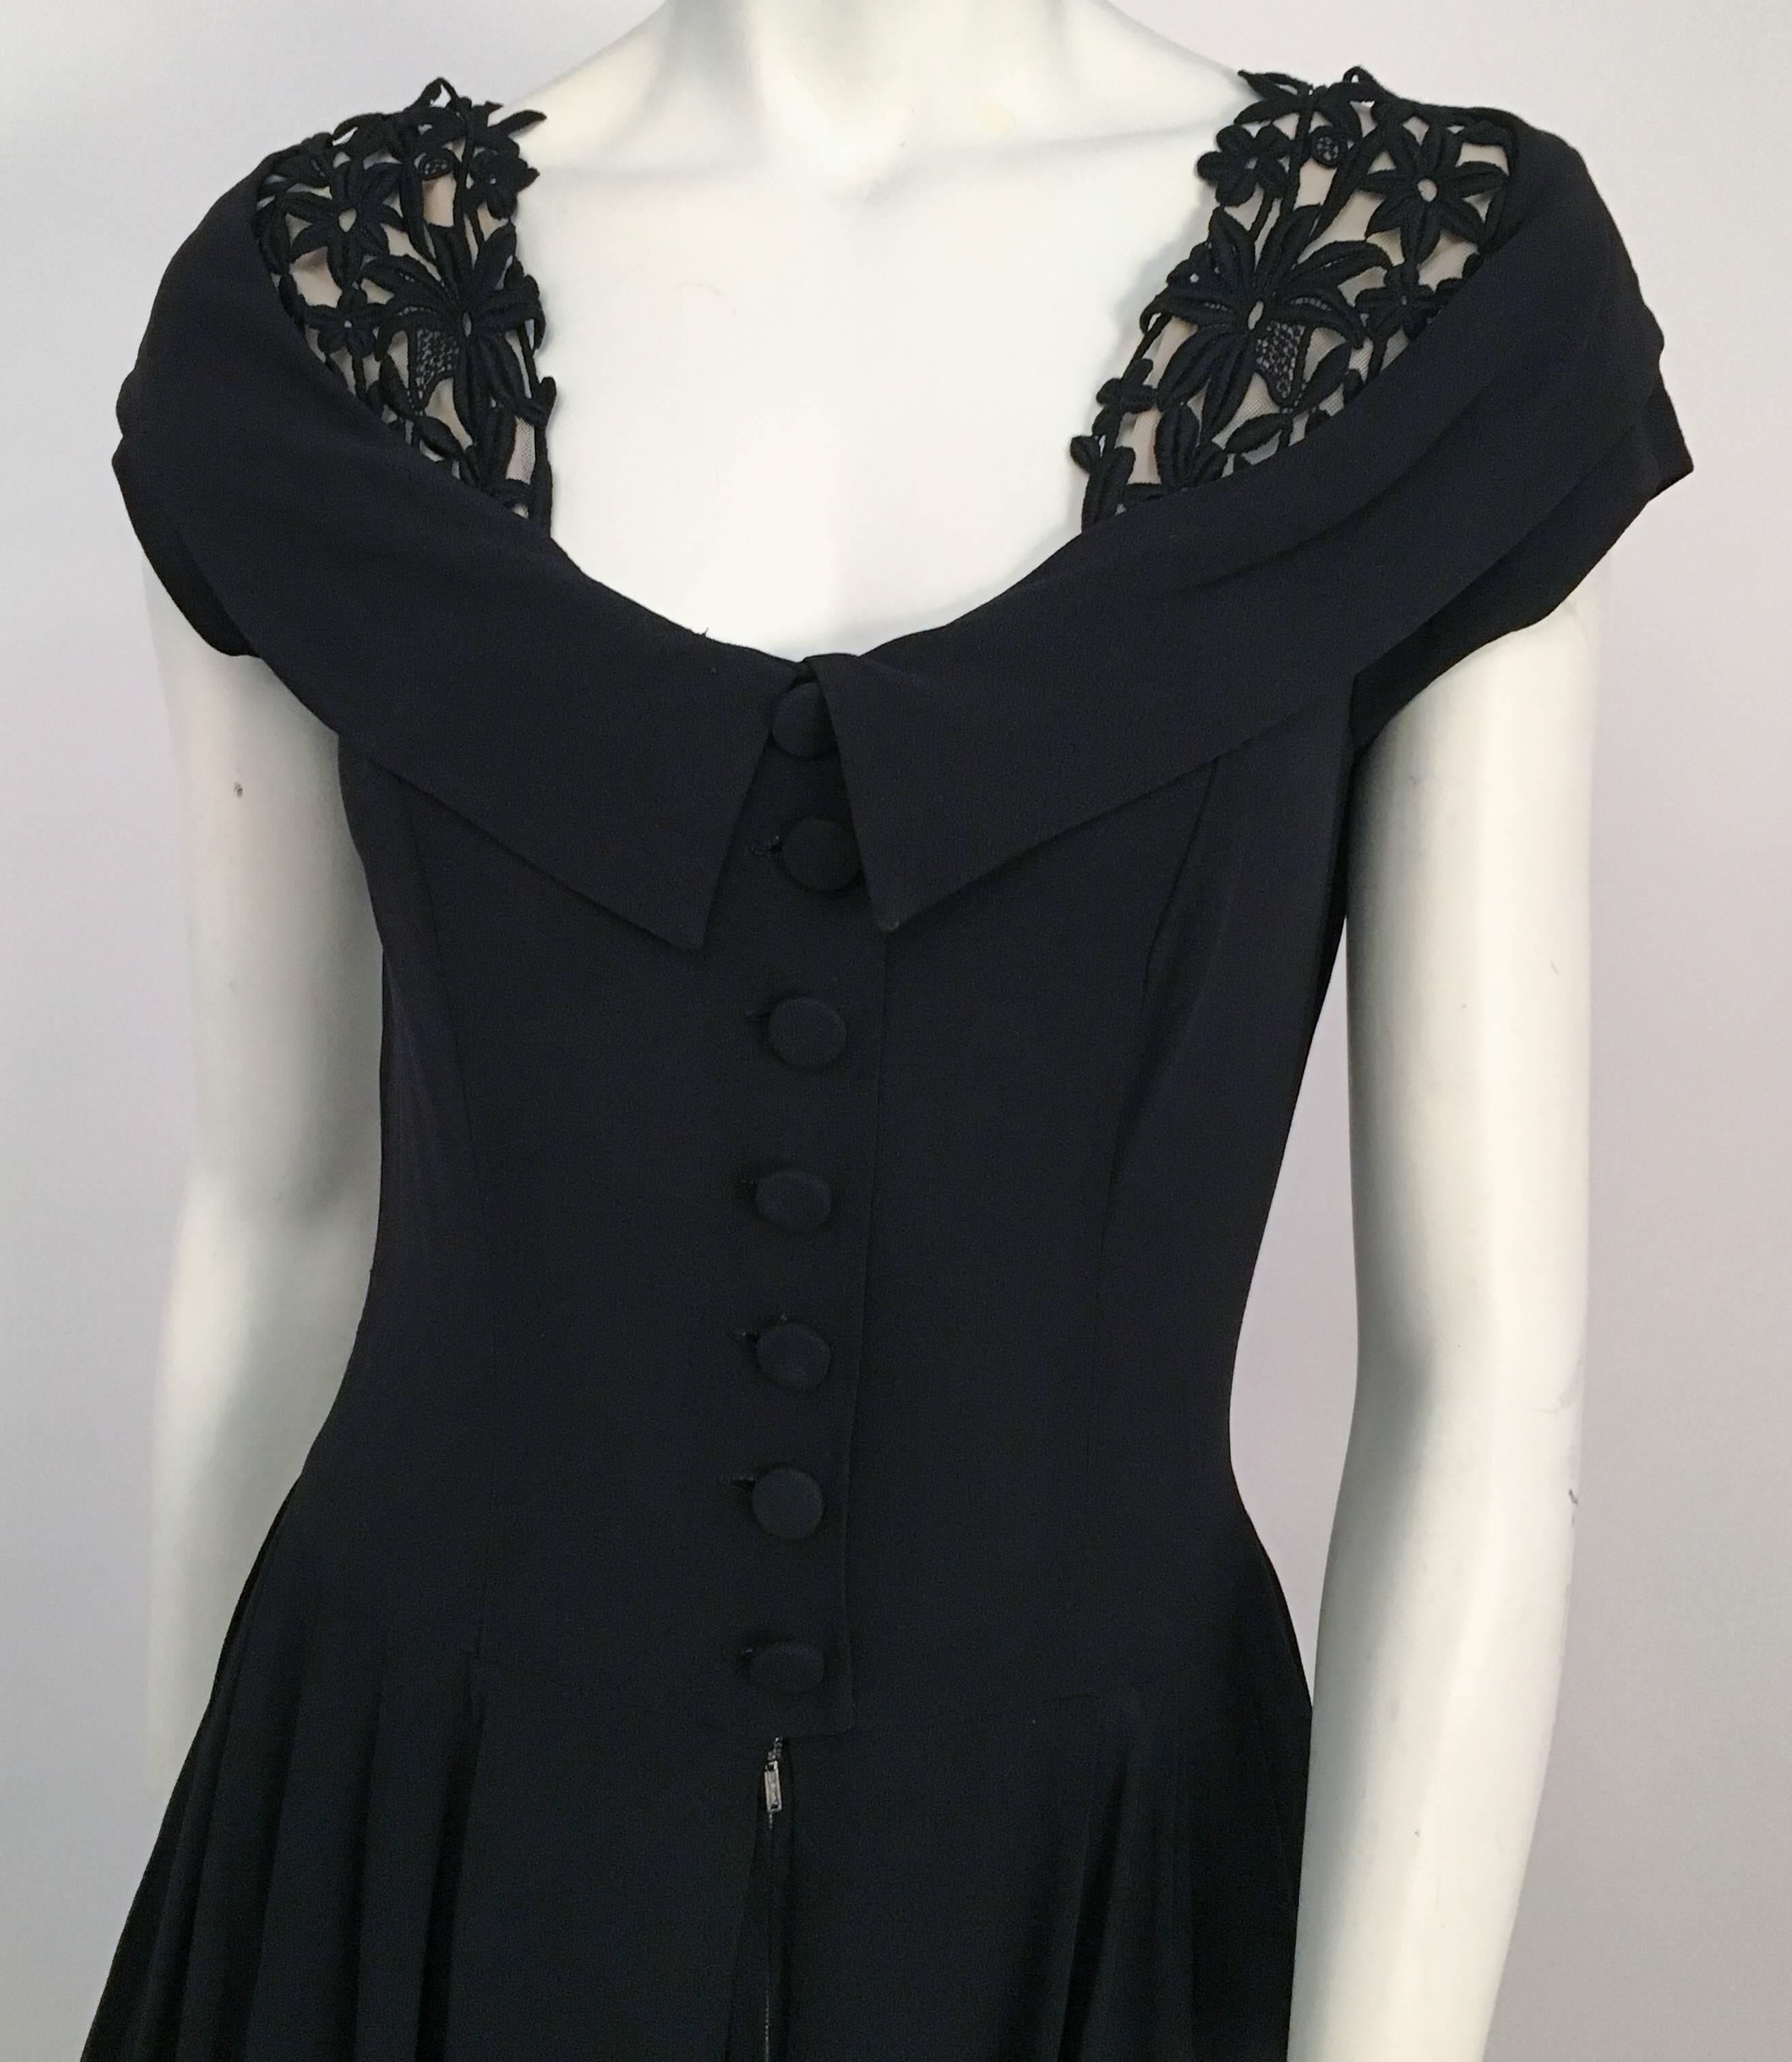 40s Black Crepe A-Line Dress w/ Lace Collar Detail. Front button and metal zipper closure. Lace neckline detail over nude mesh. Dress in photo worn over petticoat for additional support. 